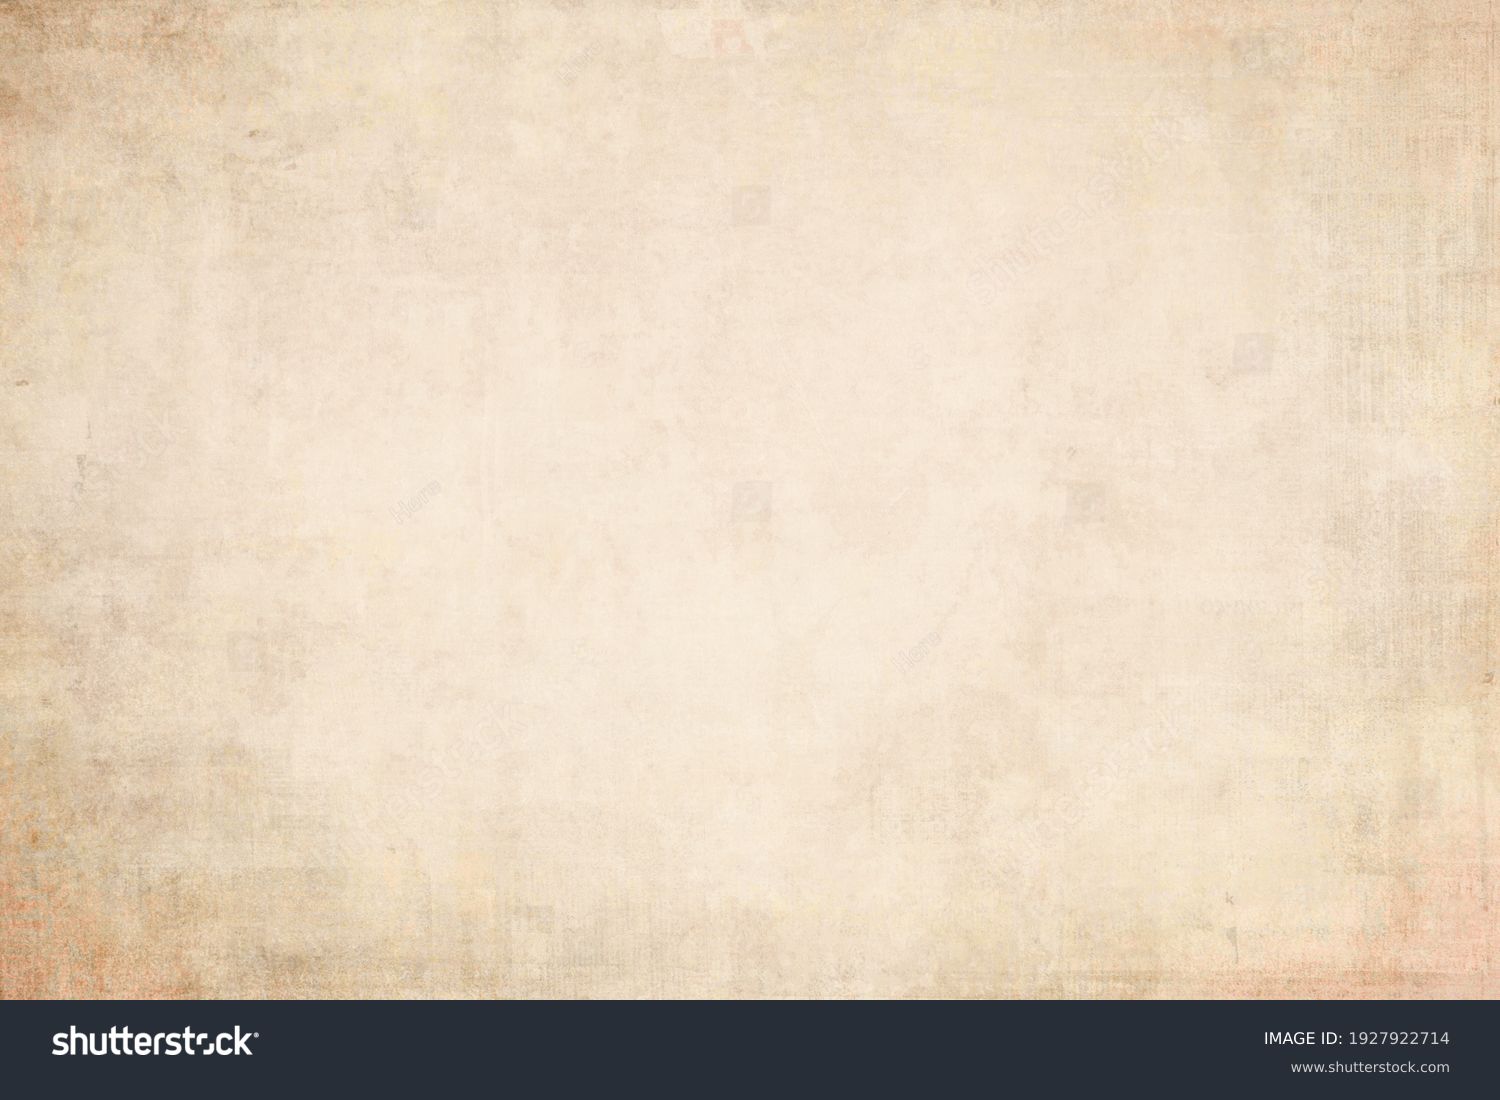 OLD NEWSPAPER BACKGROUND, BLANK BROWN GRUNGE PAPER TEXTURE, RETRO WALLAPPER PATTERN, GRUNGY TEXTURED DESIGN WITH BLANK SPACE FOR TEXT #1927922714